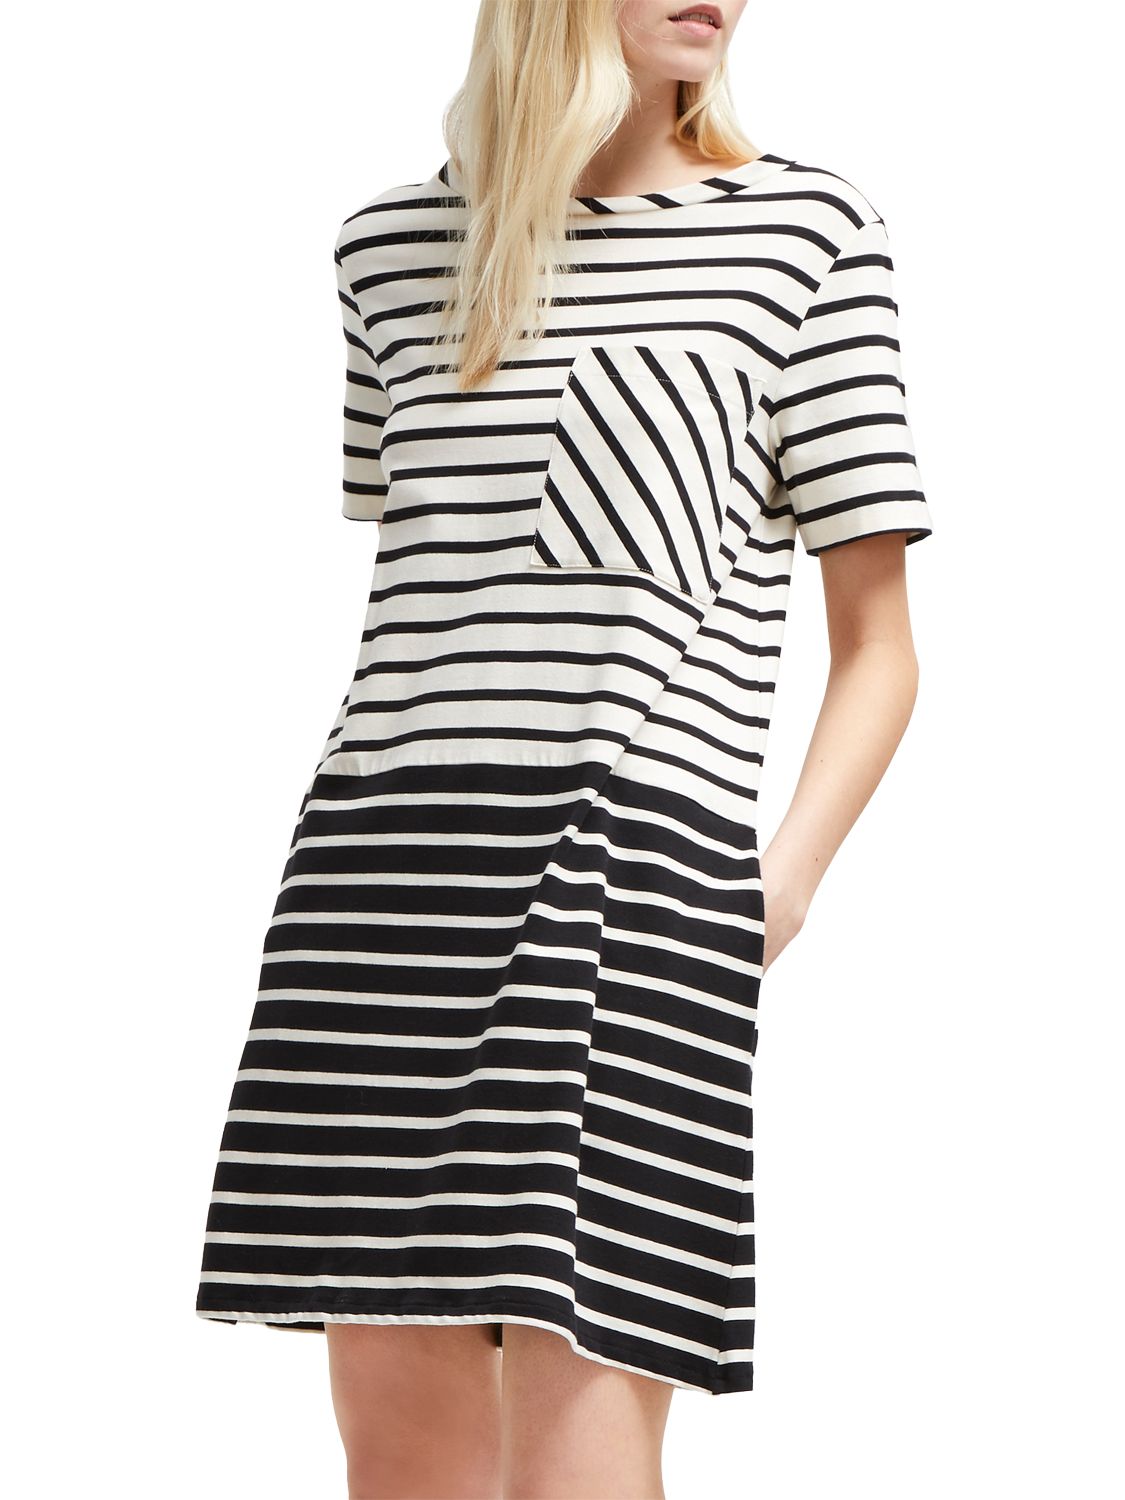 French Connection Striped Pocket Dress, Multi